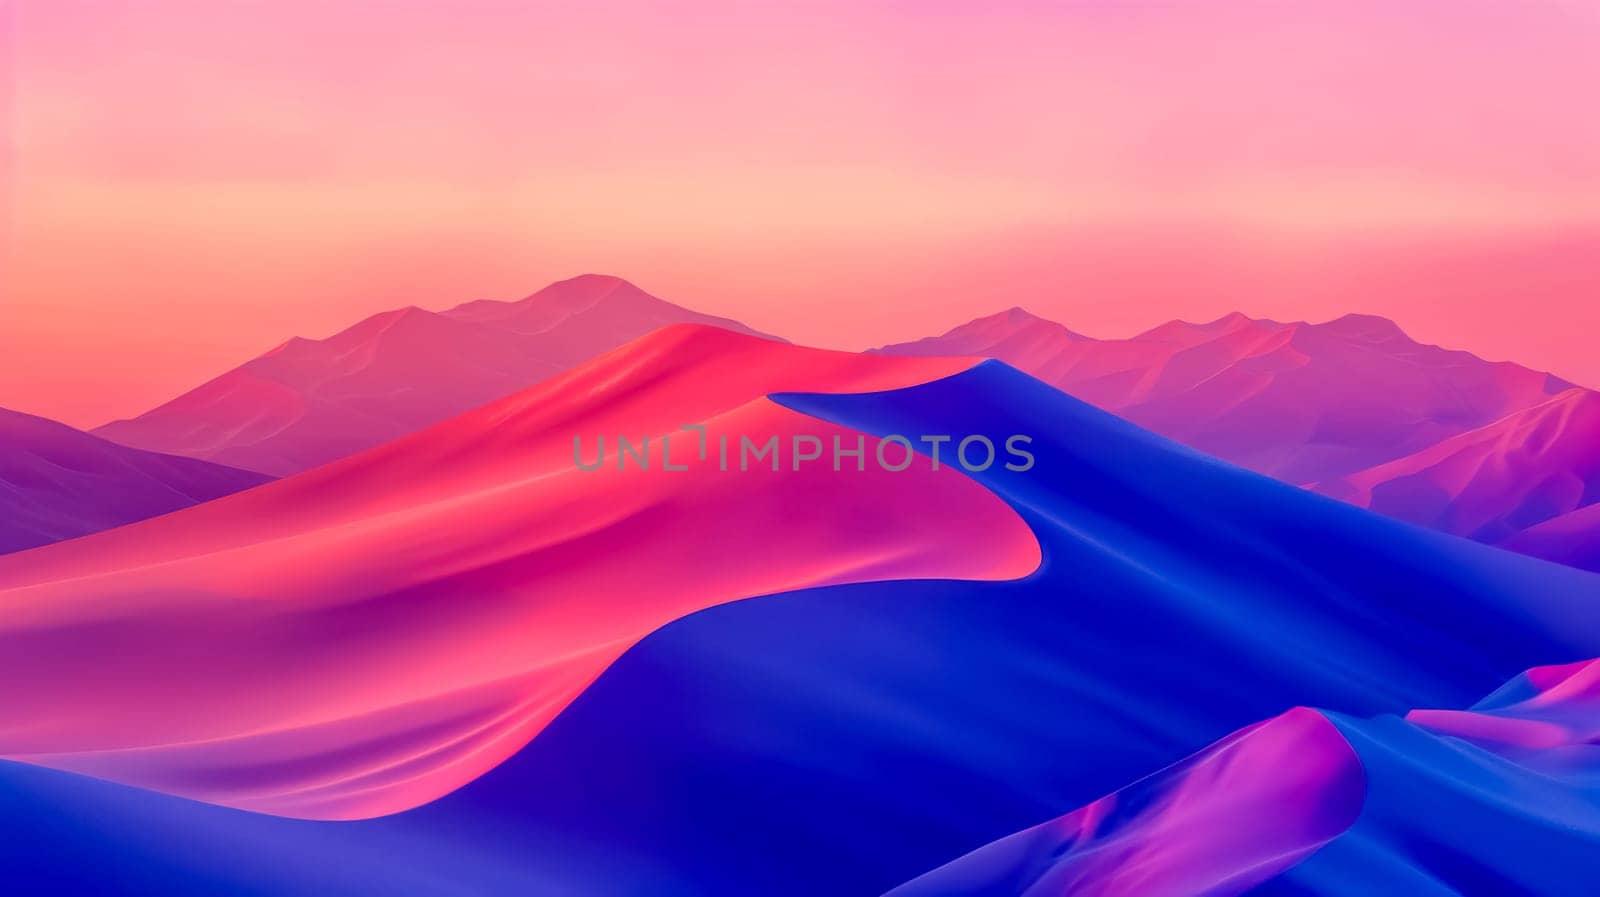 Vibrant and surreal desert sunset landscape with tranquil and peaceful scenery. Featuring colorful abstract mountains. A fantasy twilight sky in shades of pink. Blue. And purple